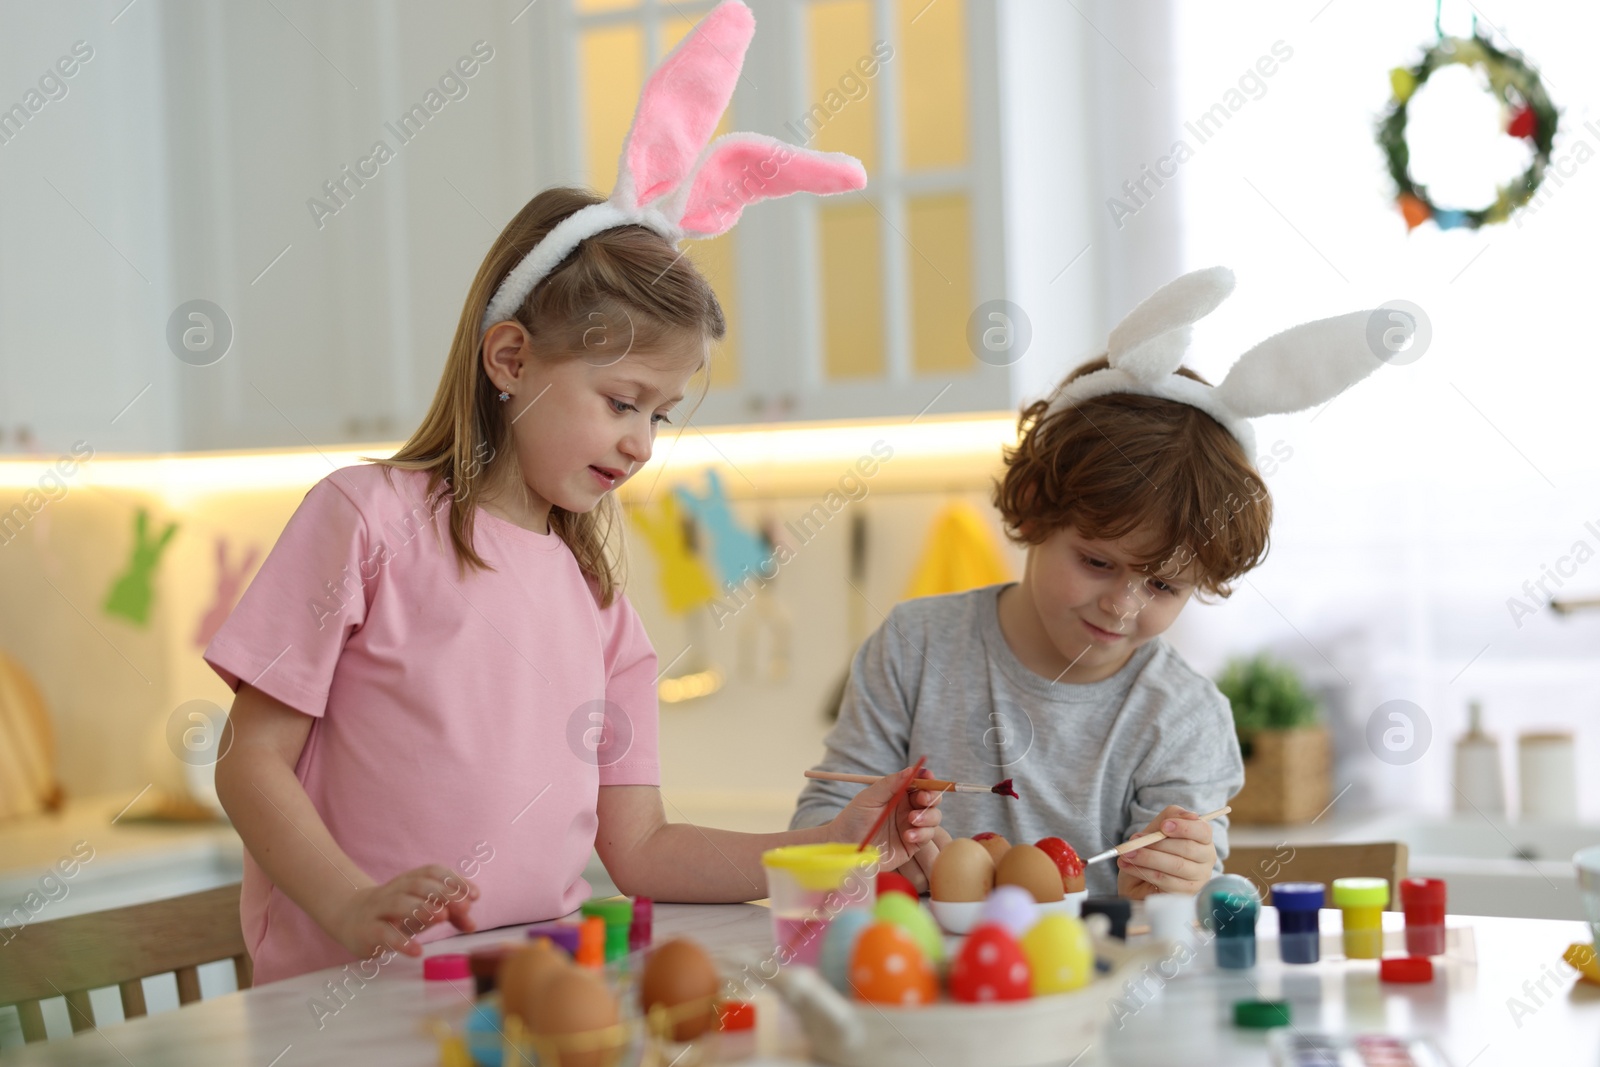 Photo of Easter celebration. Cute children with bunny ears painting eggs at table in kitchen